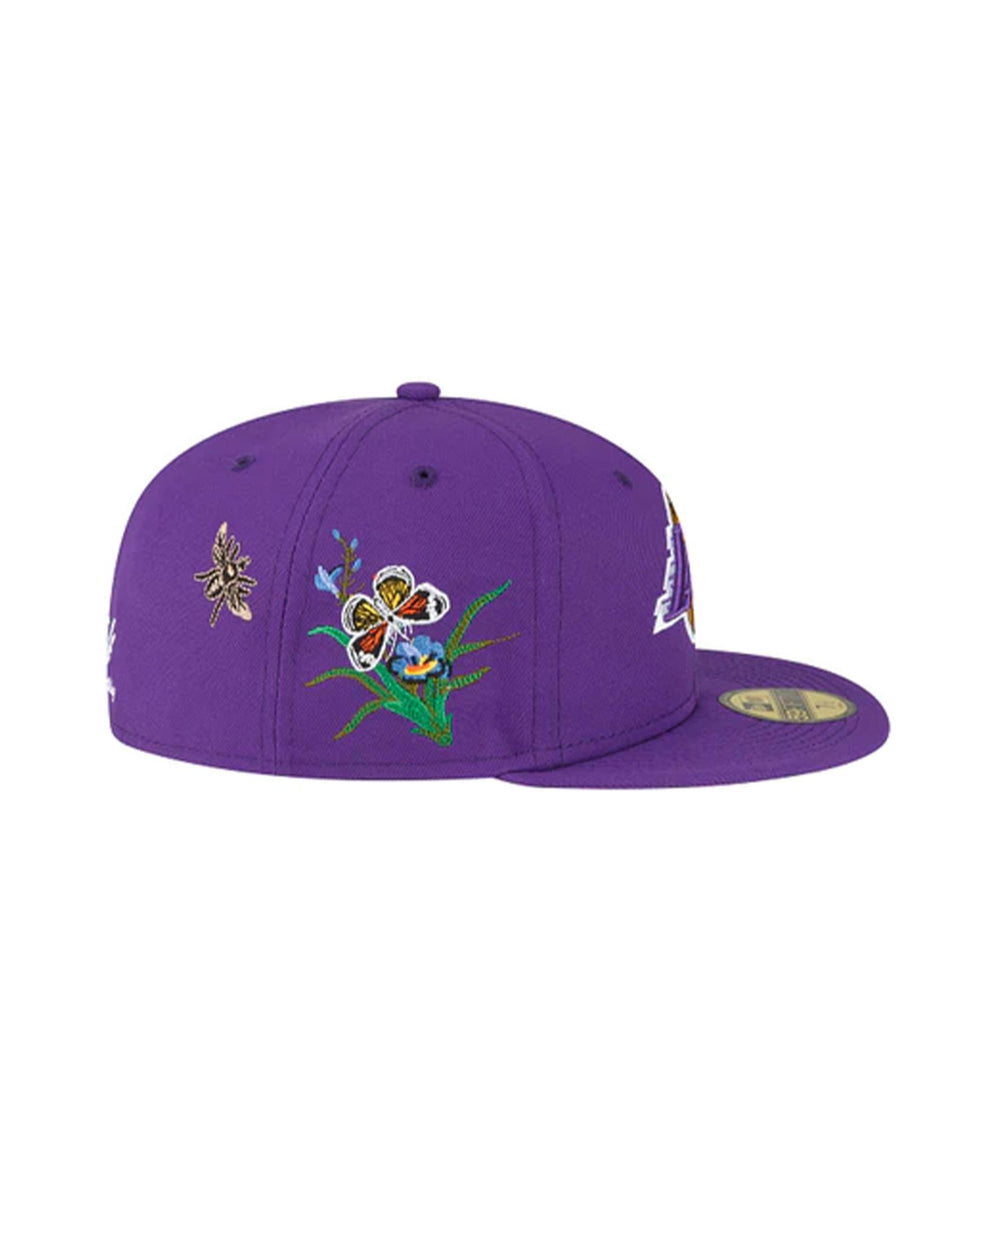 New Era Los Angeles LA Lakers Icon Edition 59FIFTY Fitted Hat Cap Size 7  Purple